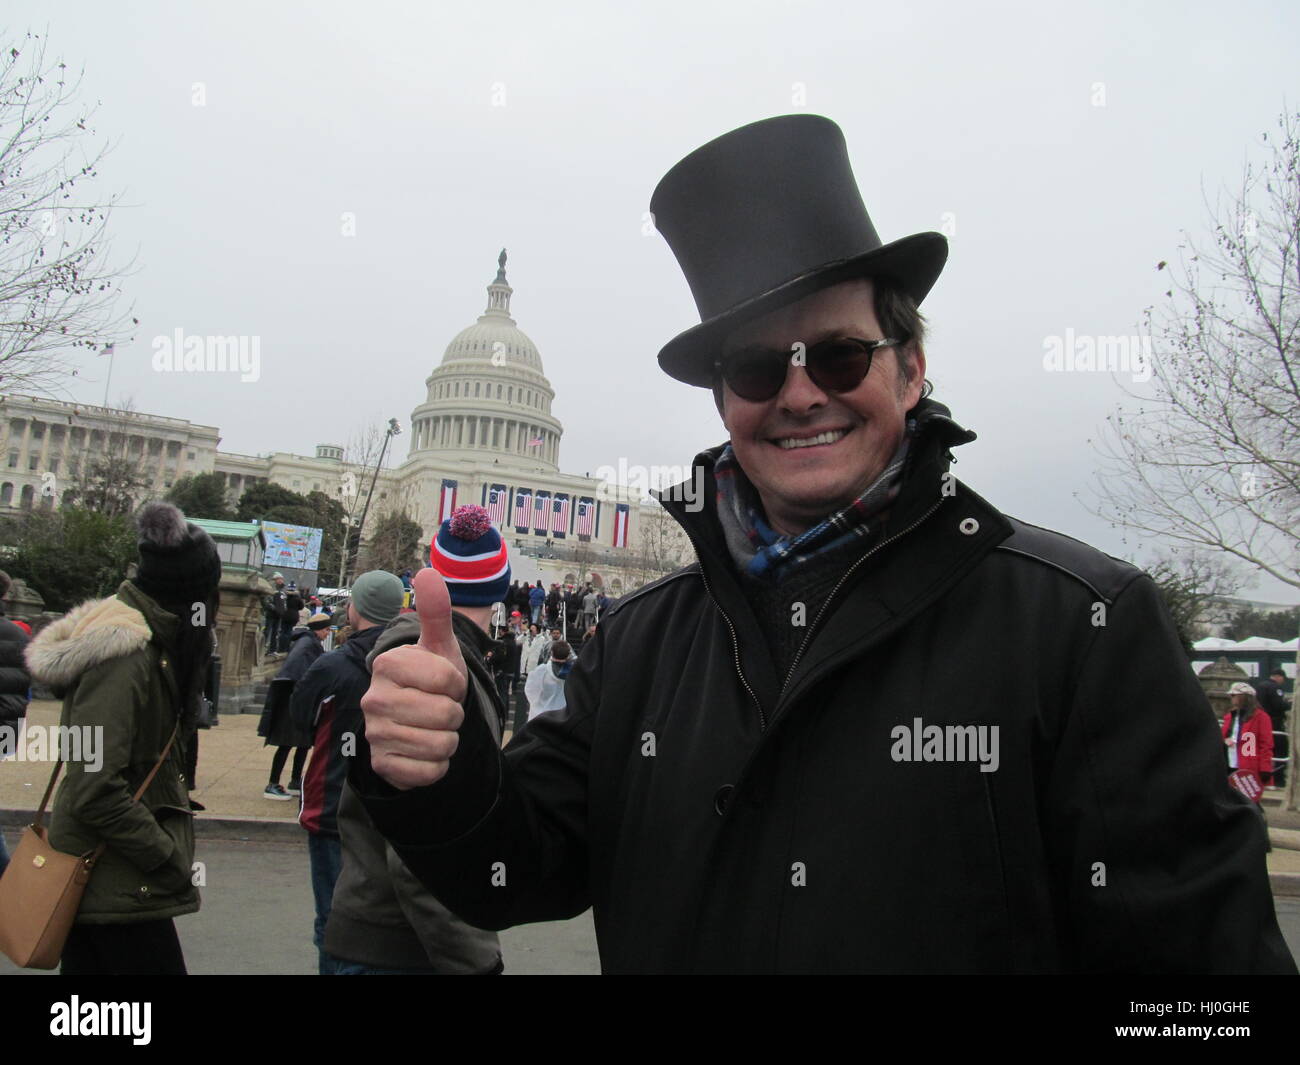 Erik Laykin, trump supporter, is seen on 20 January 2017 in Washington, USA, with a collapsible top hat, a beaver-fur Chestergate from 1880. Hundreds of thousands of Americans gathered to watch an unlikely political figure - former reality TV star Donald Trump - become the 45th president of the United States. Photo: Frank Fuhrig/dpa Stock Photo